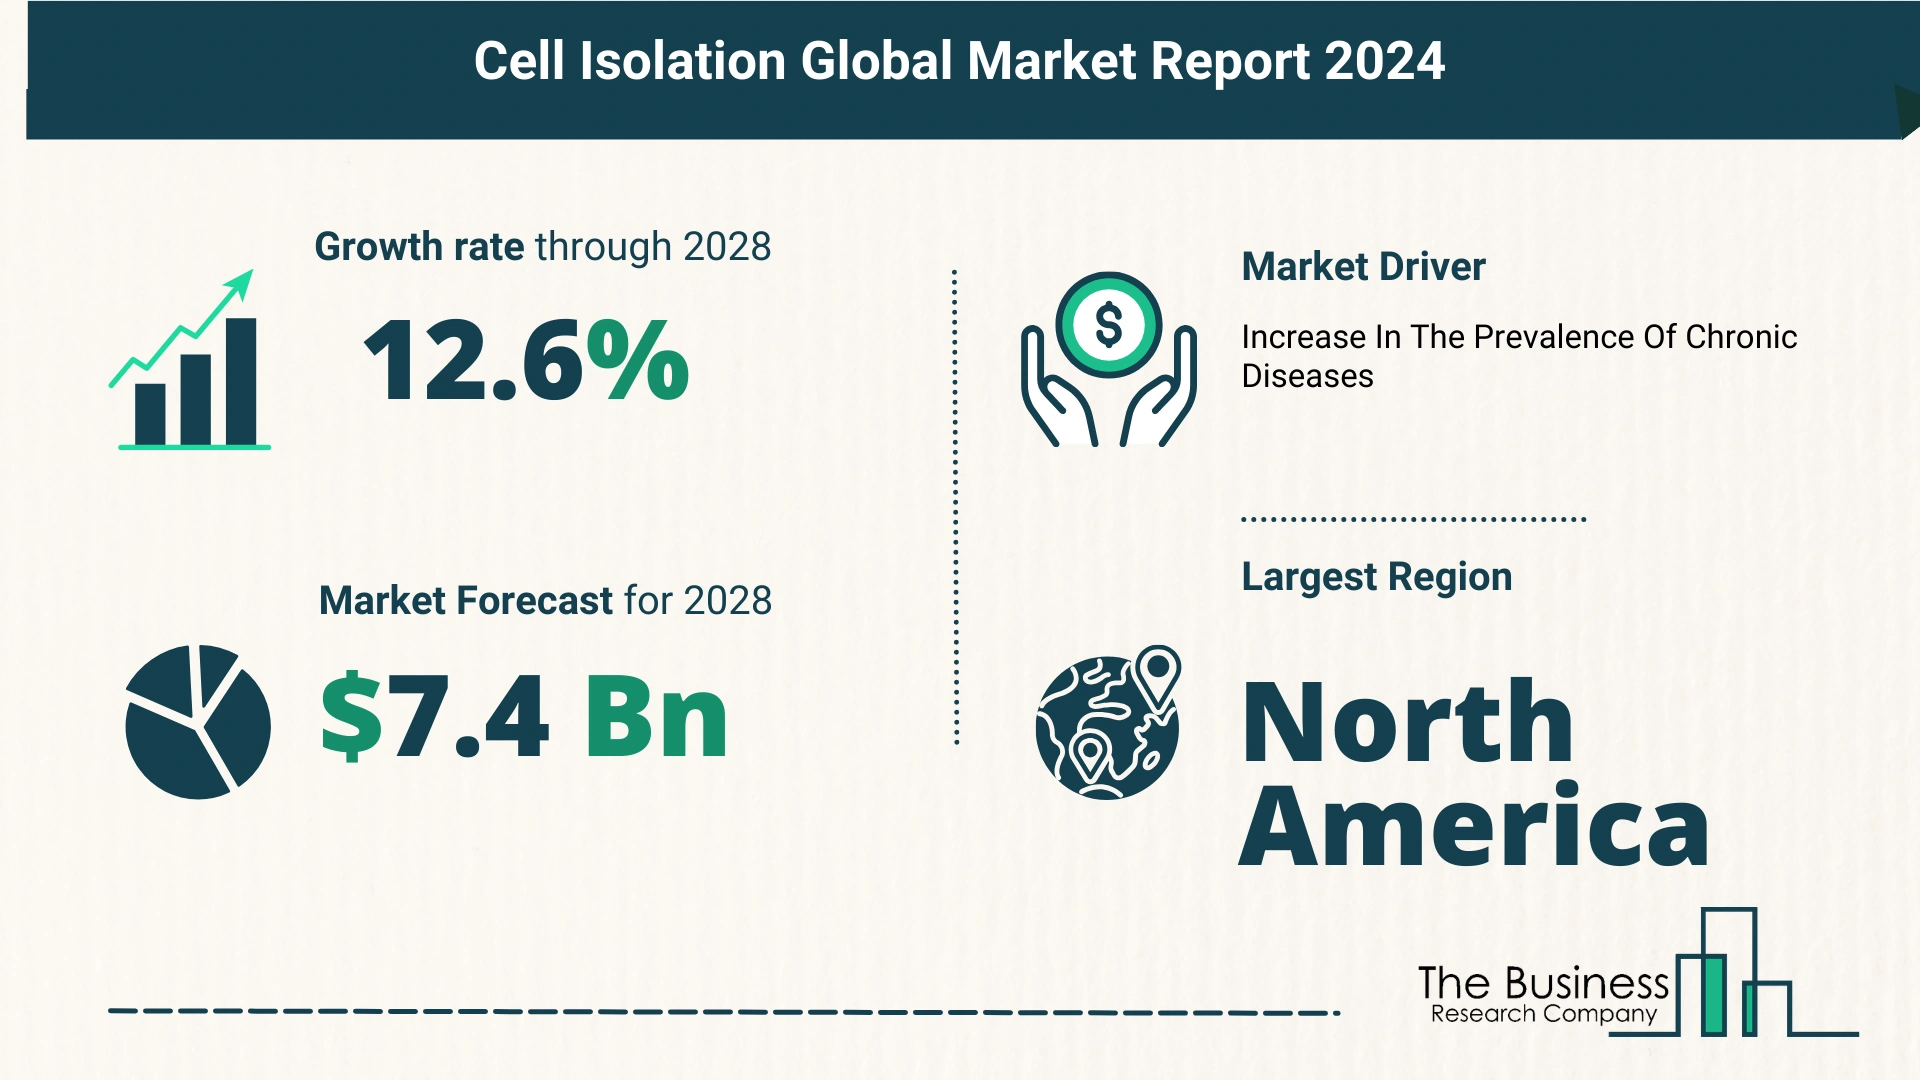 How Is The Cell Isolation Market Expected To Grow Through 2024-2033